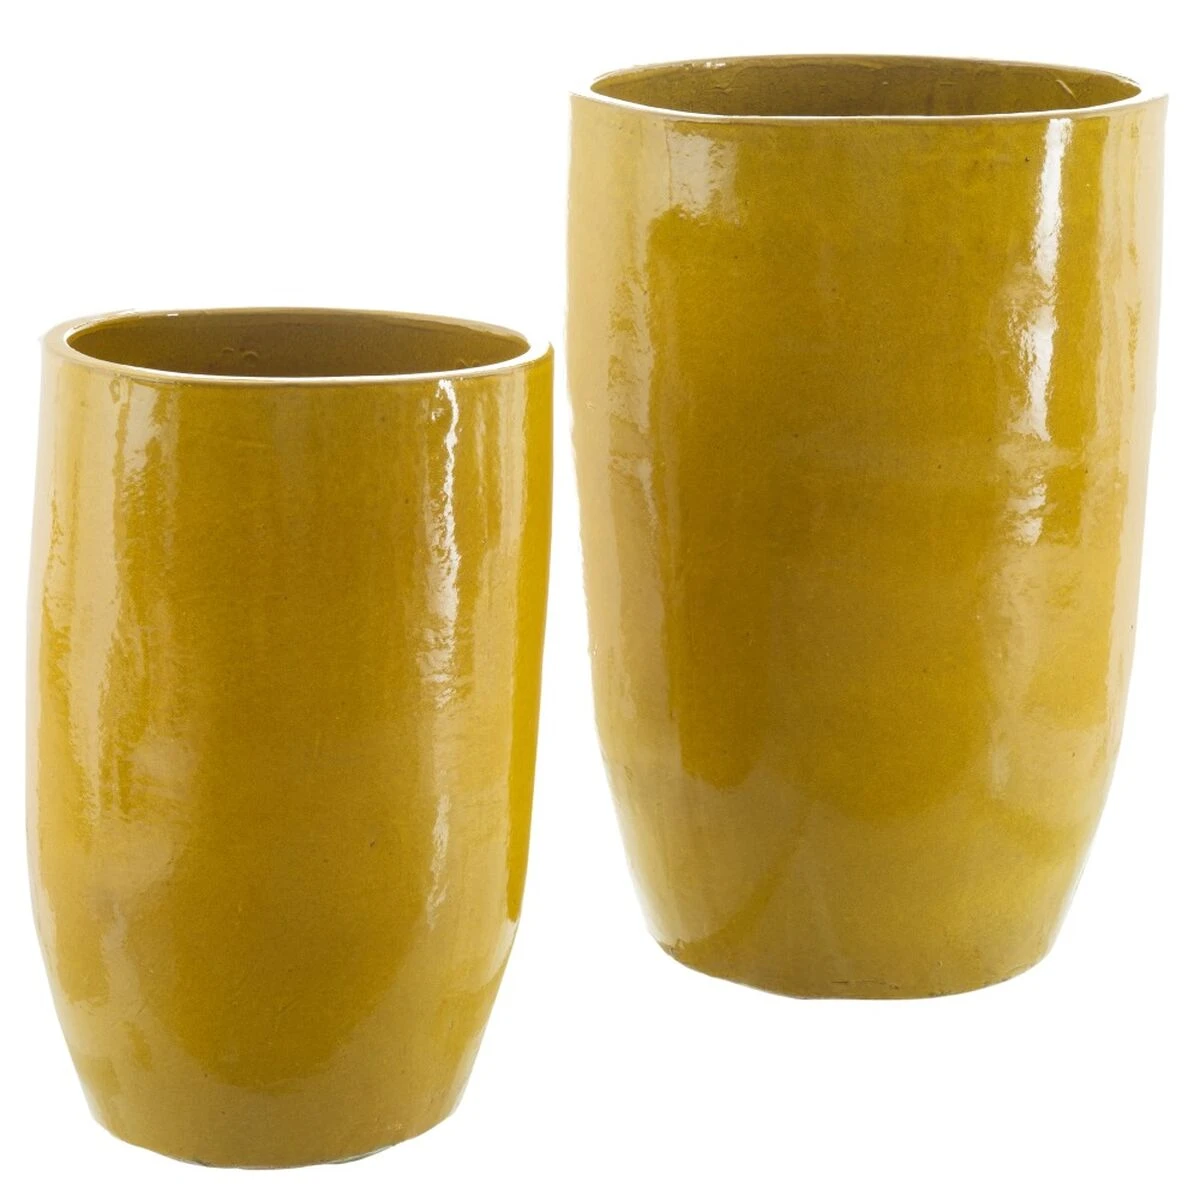 Two glossy yellow vases on white background.